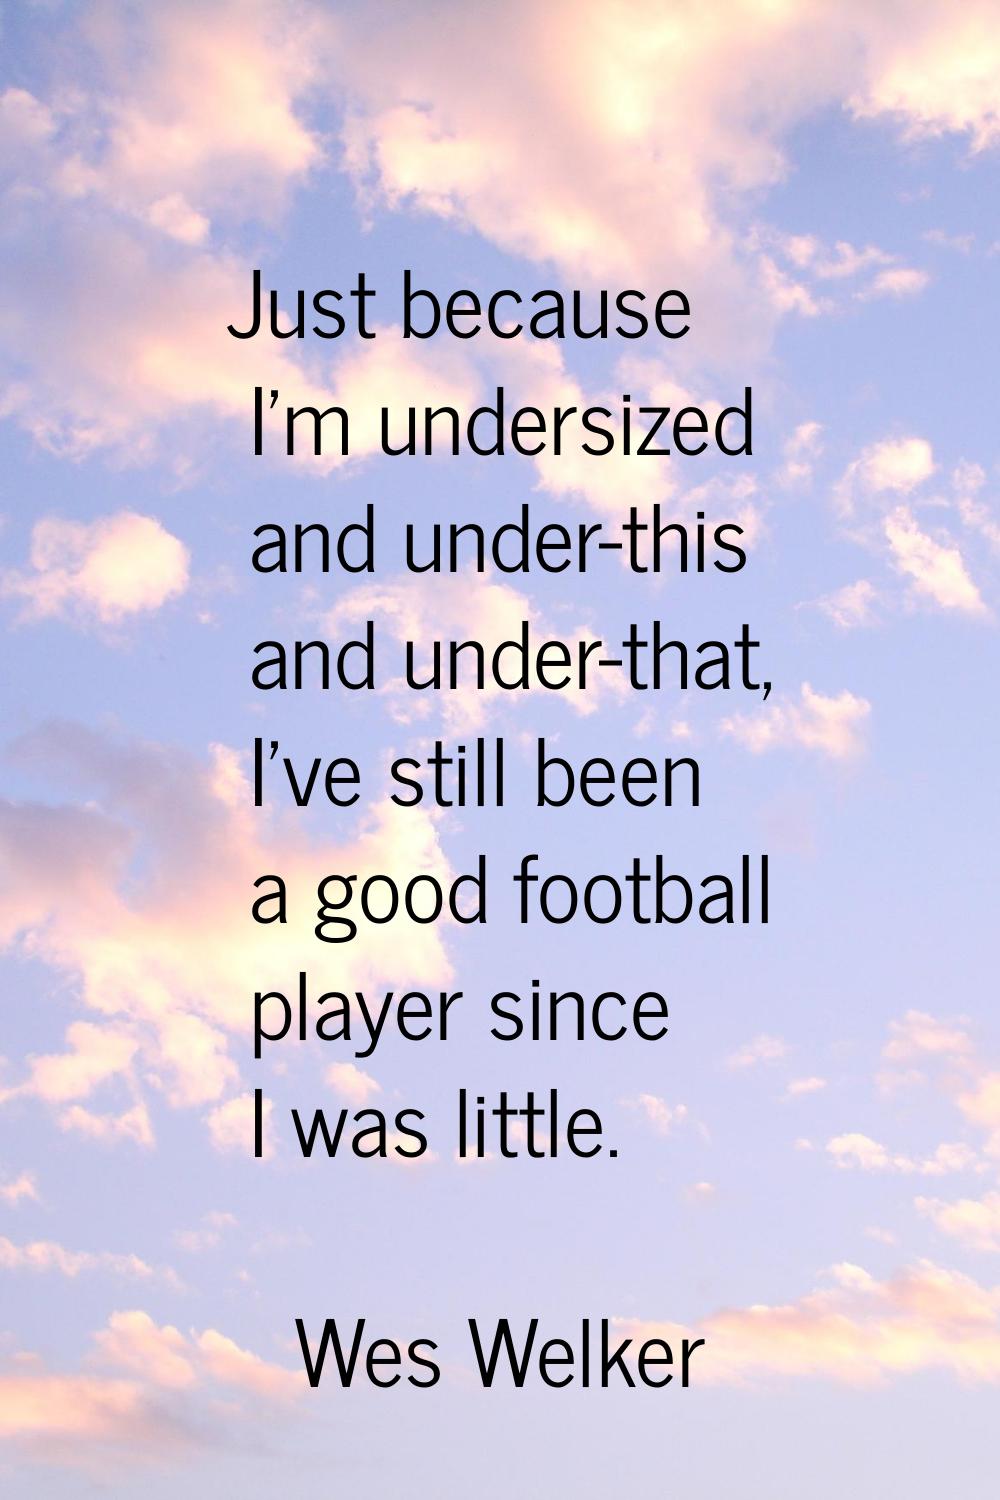 Just because I'm undersized and under-this and under-that, I've still been a good football player s